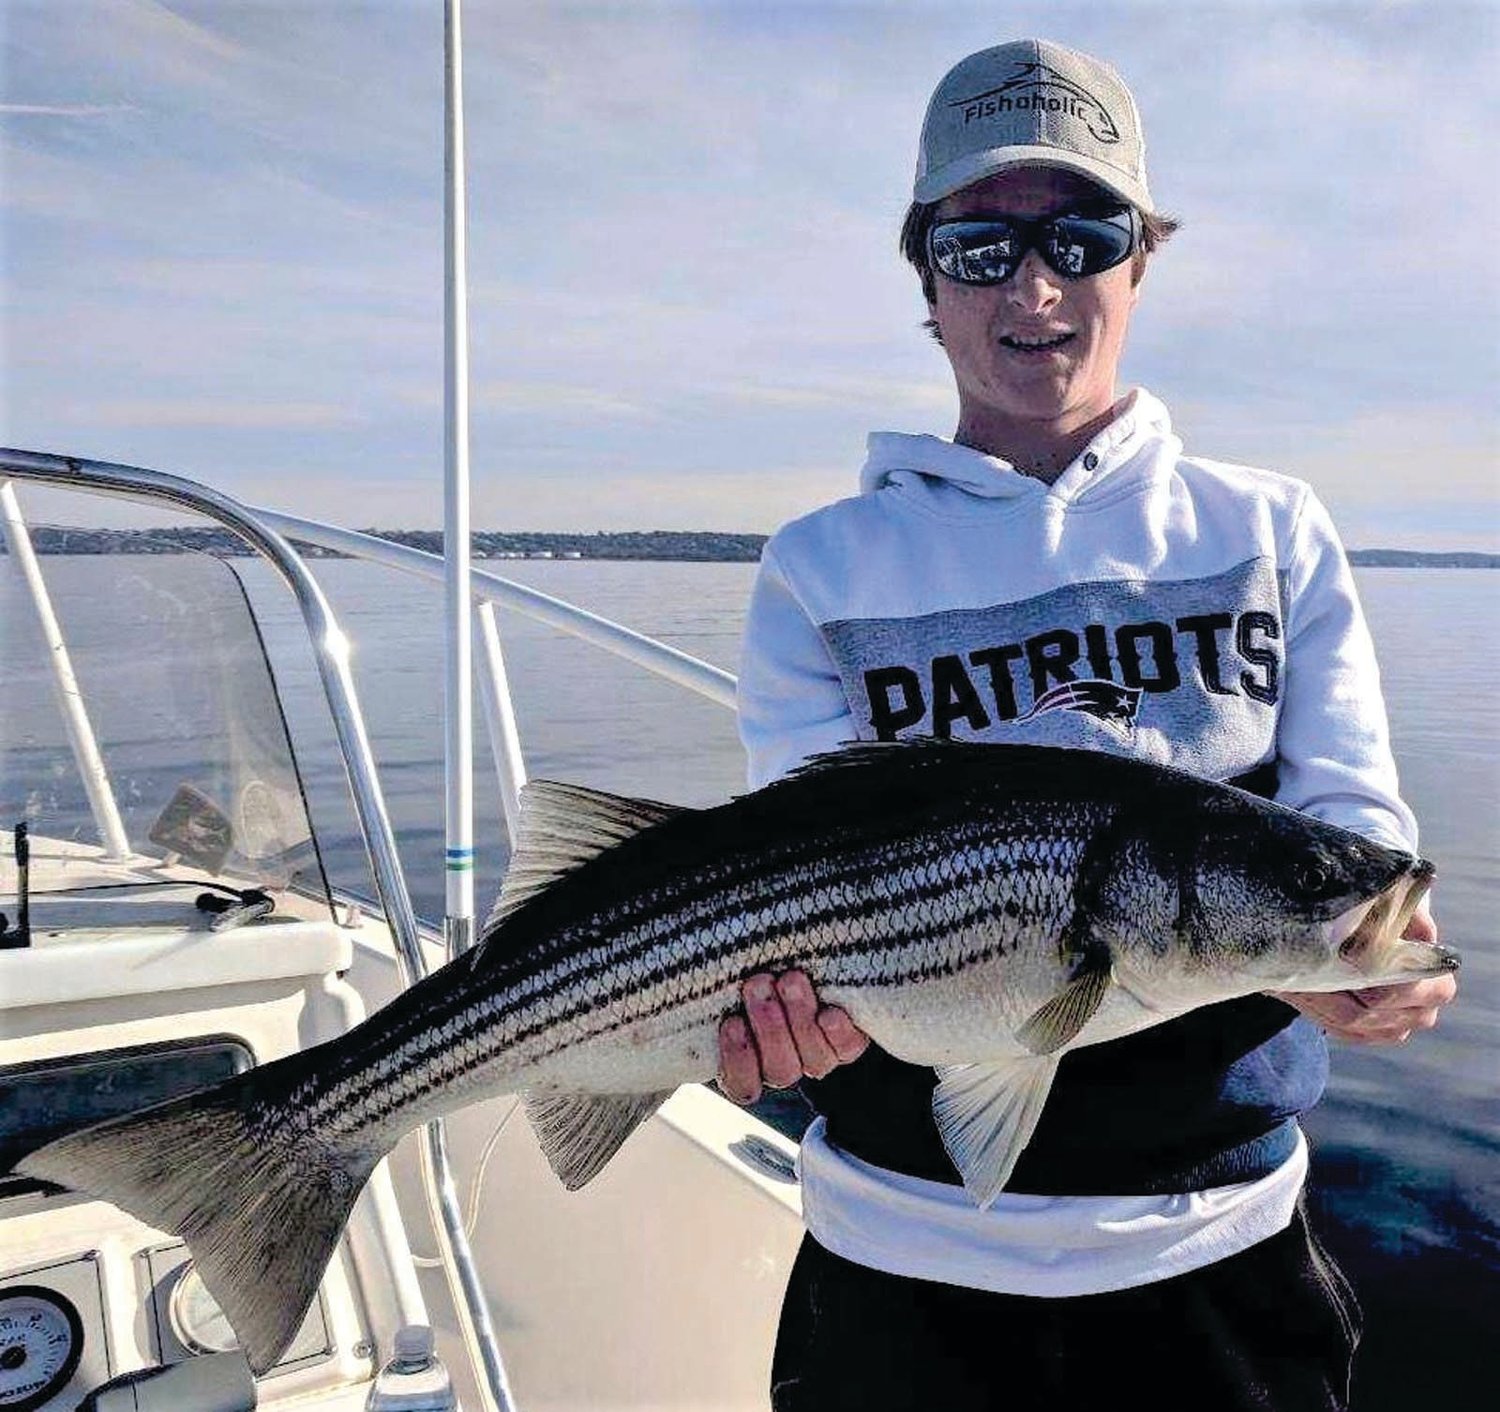 BASS BITE GOOD: Joe Earley caught this 30-inch striped bass in the northern part of Mt. Hope Bay when fishing with his father this weekend. Joe said, “The bass were schooling on the surface and we caught four casting SP Minnows to them.”